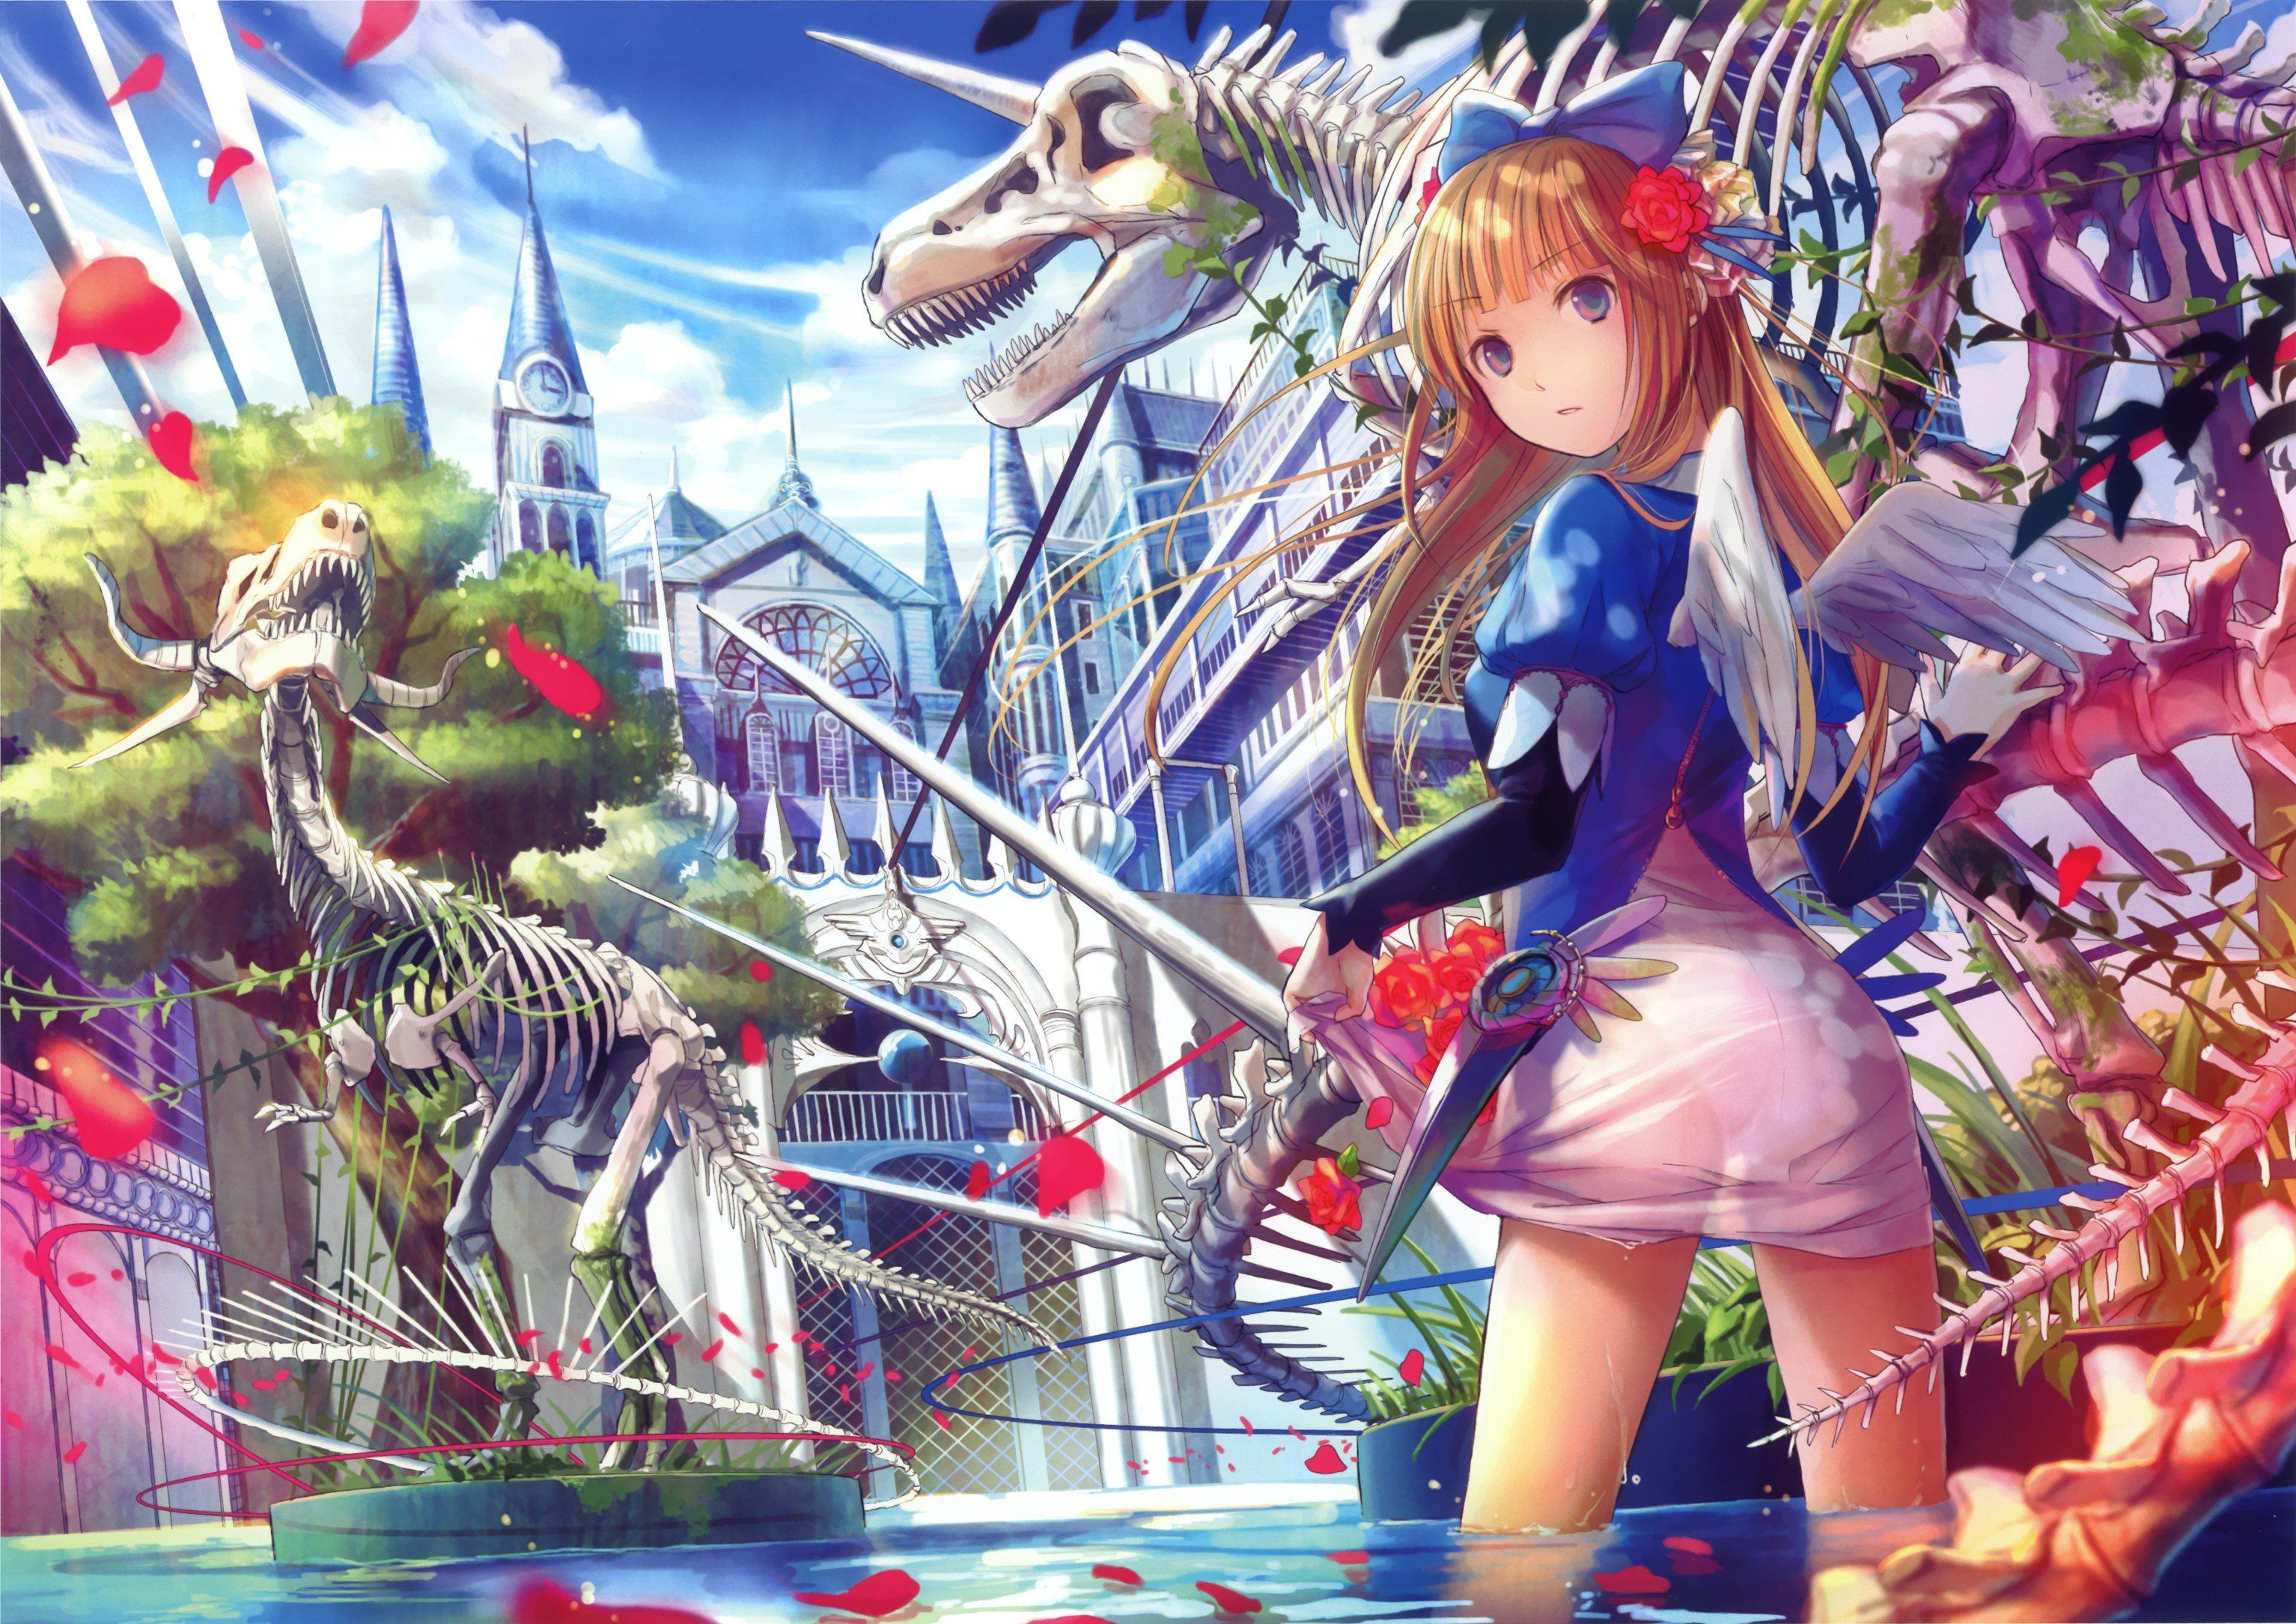 wings, Original characters, Water, Sky, Clouds, Petals, Dinosaurs, Anime, Anime girls, Trees HD Wallpaper / Desktop and Mobile Image & Photo